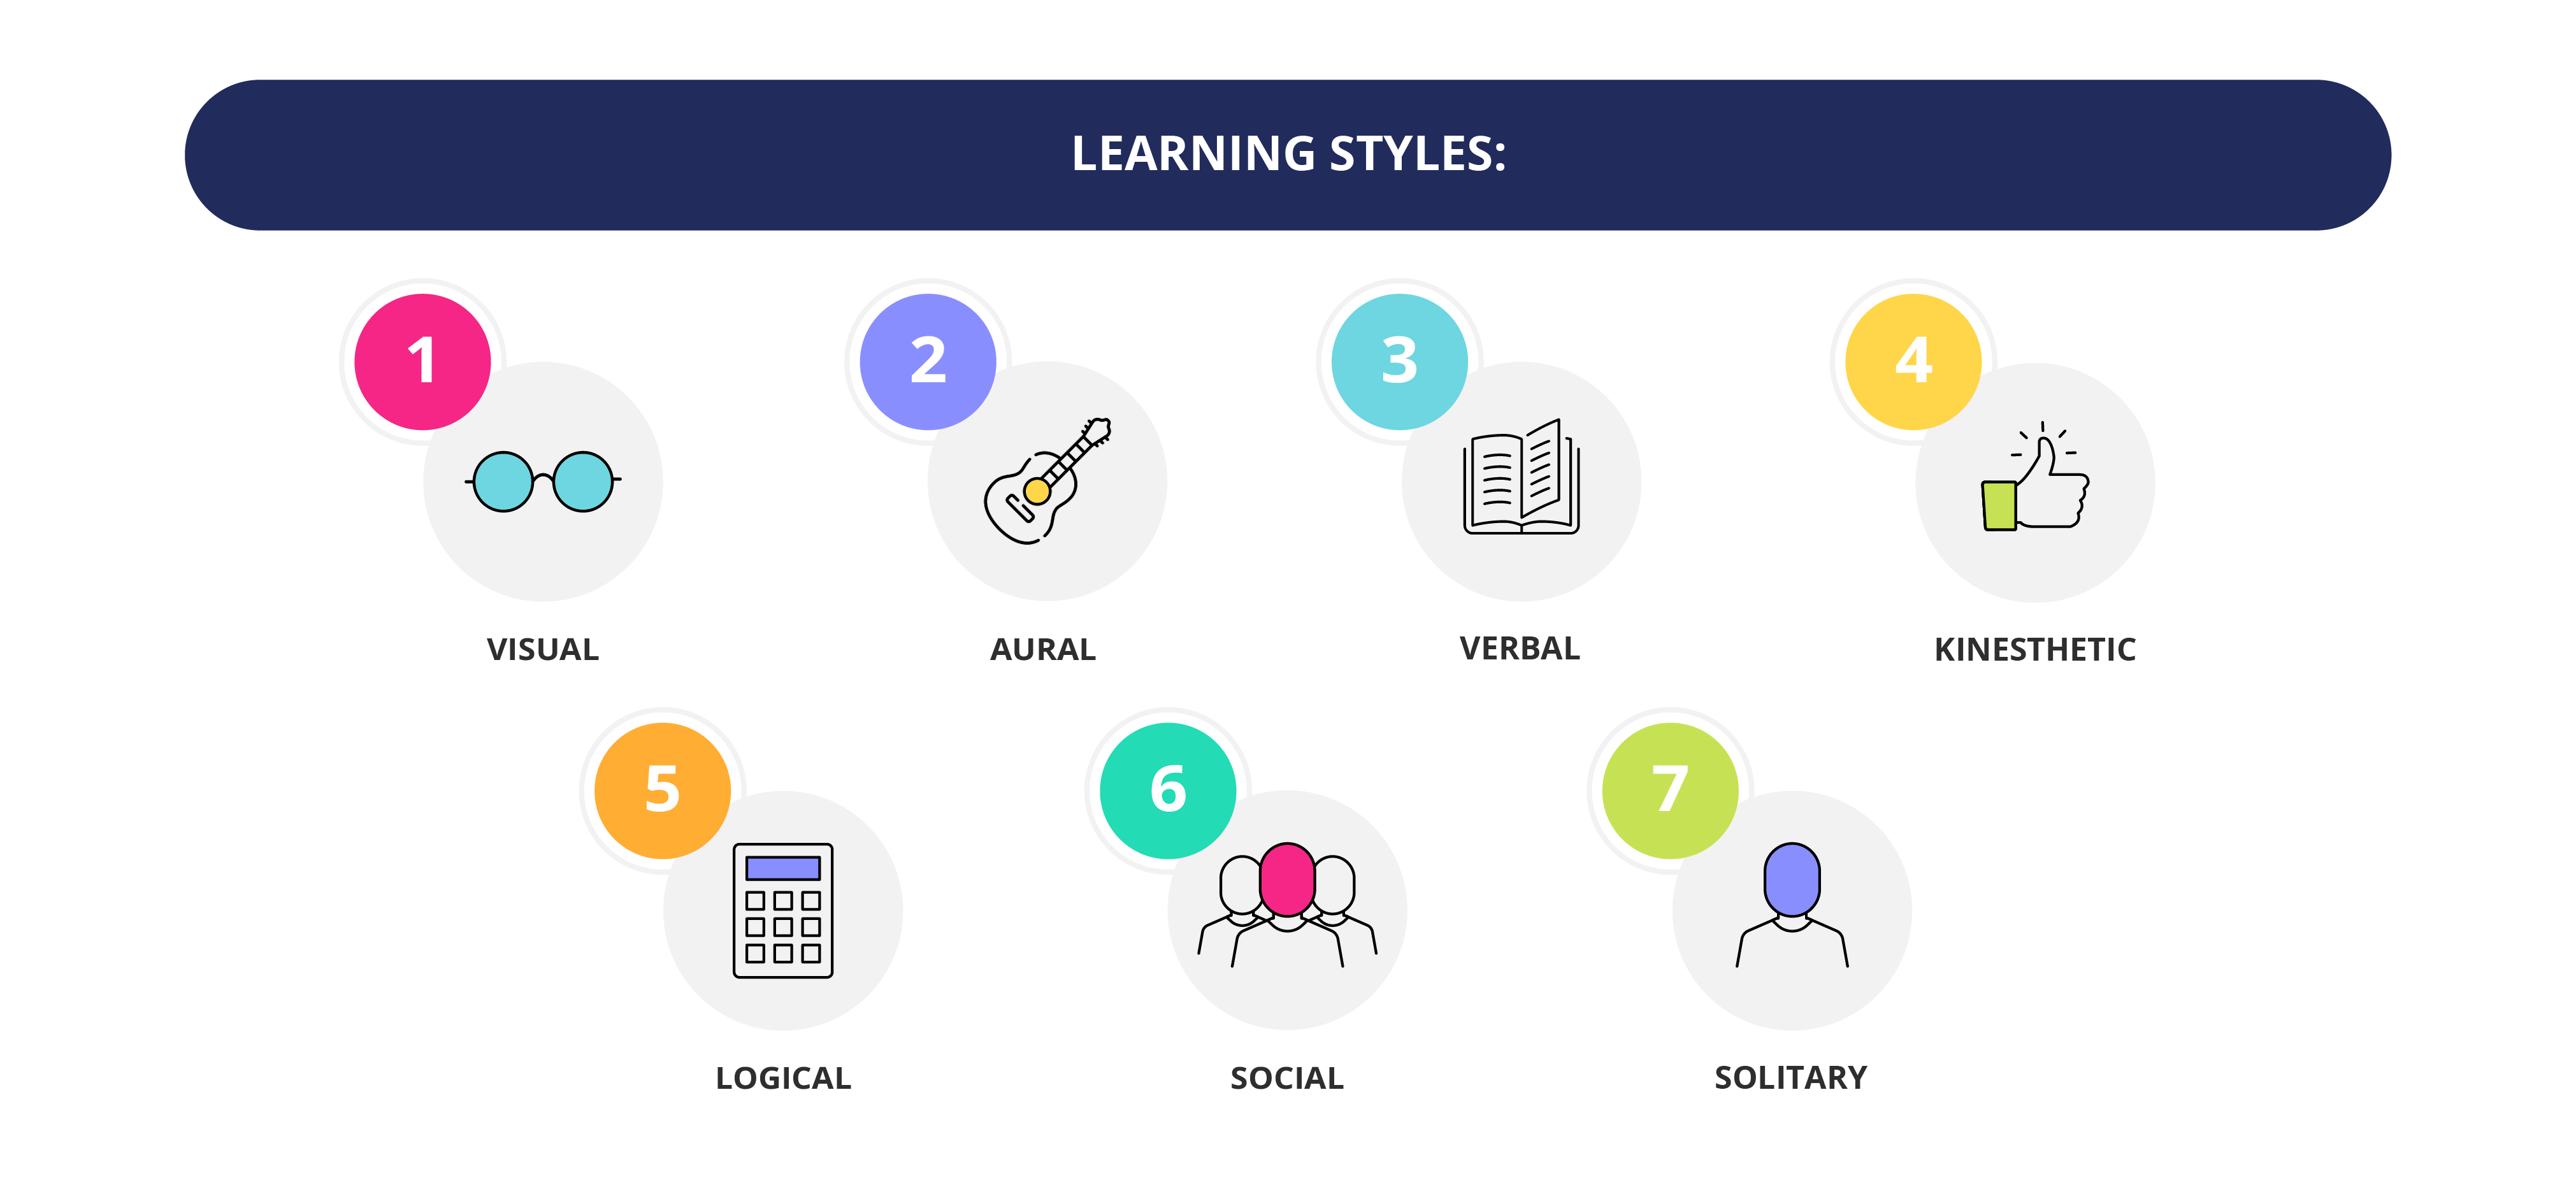 4 Types of Learners in Education